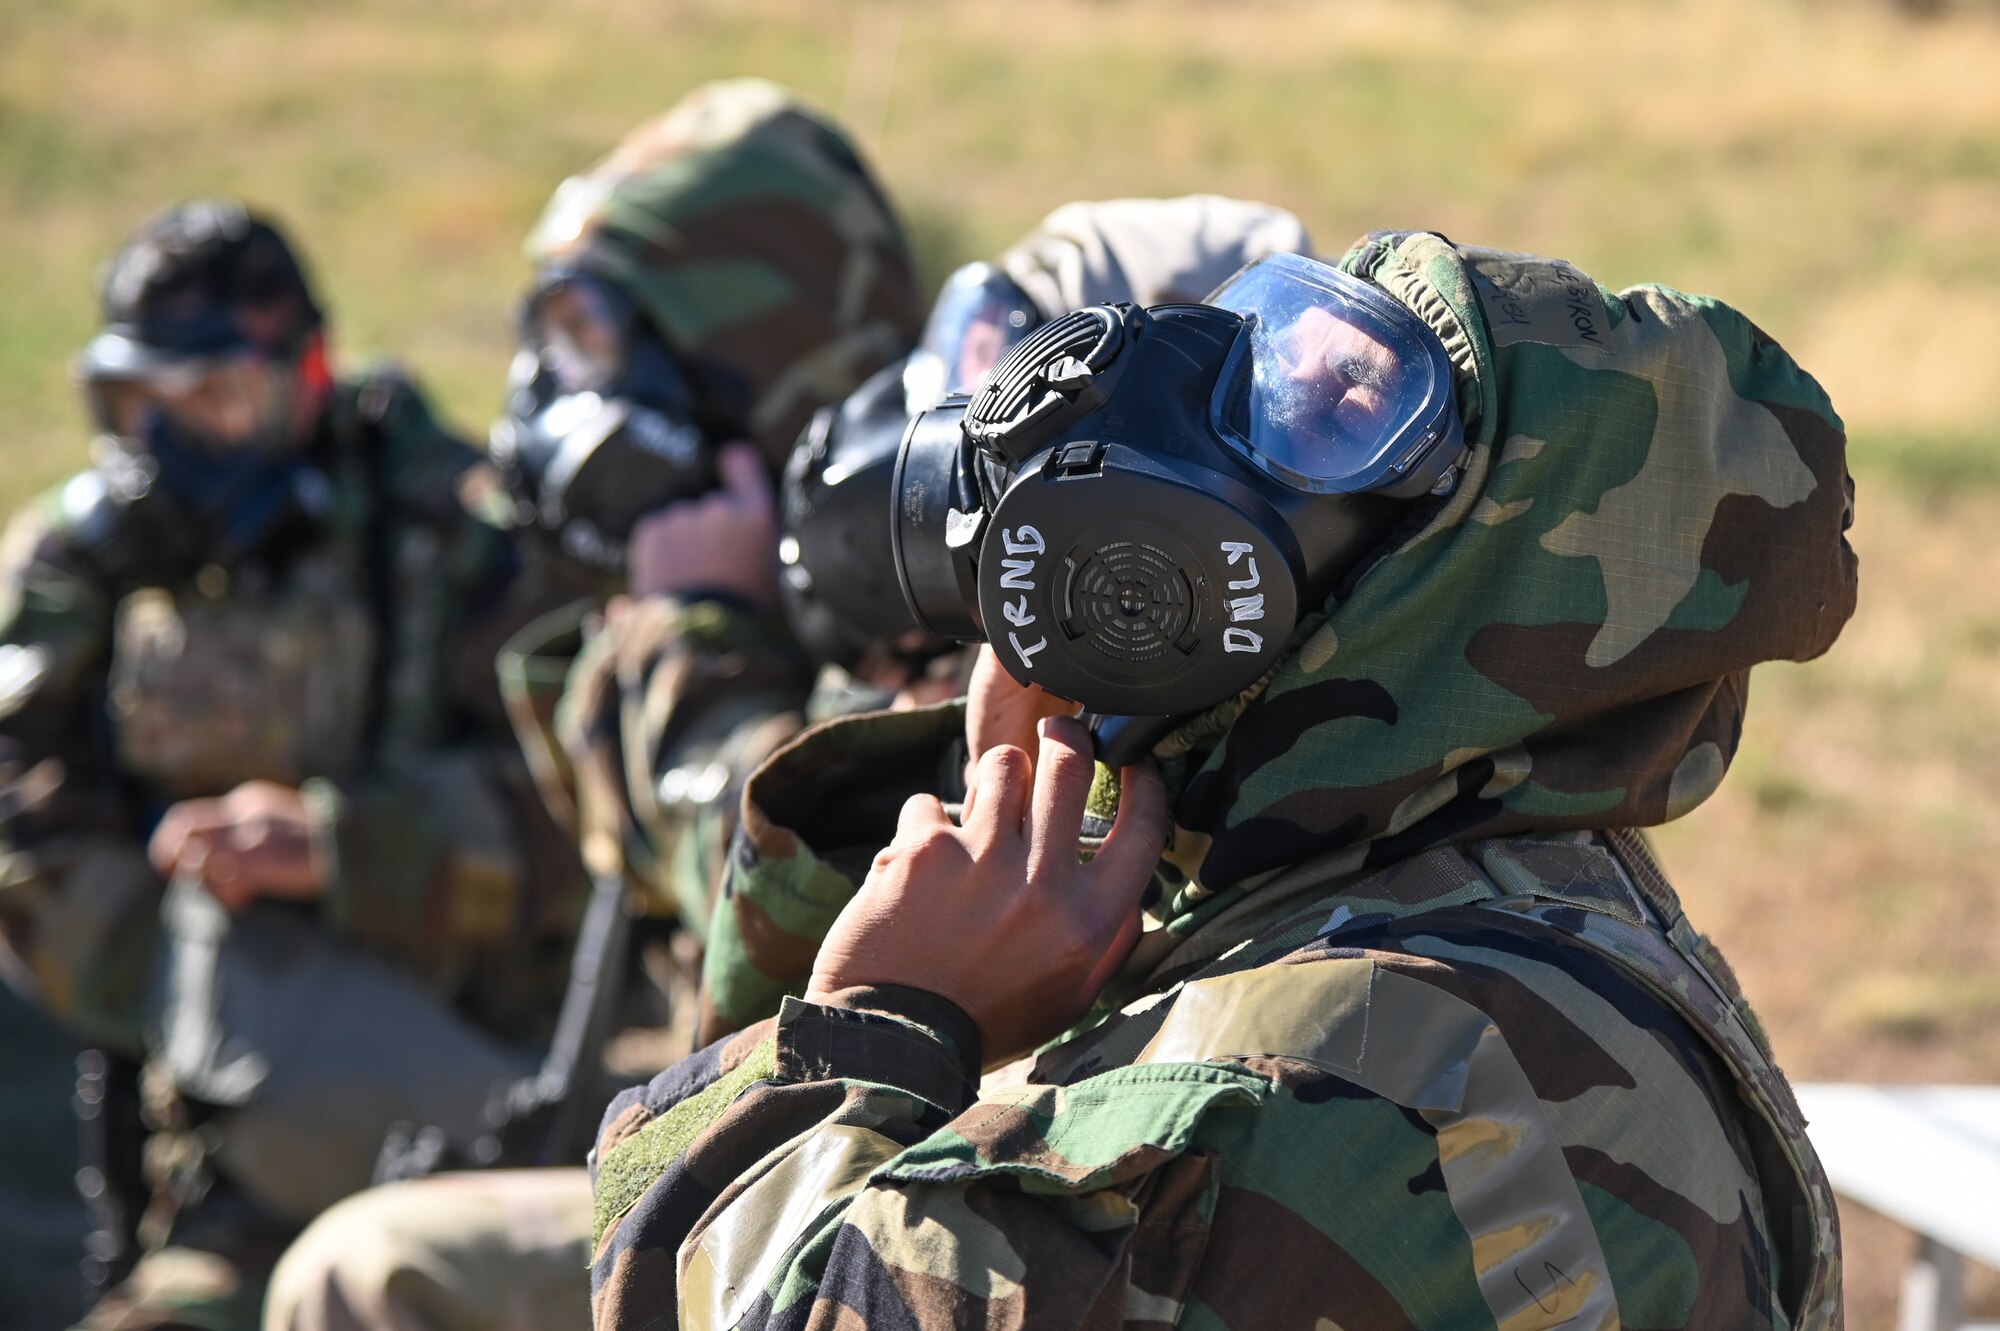 Master Sgt. Bryon Price, 75th Security Forces Squadron, seals his hood around his gas mask before a "Shoot, Move, Communicate" drill Sept. 22, 2021, at Hill Air Force Base, Utah. Squadrons from the 75th Air Base Wing participated in a phase II readiness exercise where they were assessed on performing tasks in an austere environment. (U.S. Air Force photo by Cynthia Griggs)